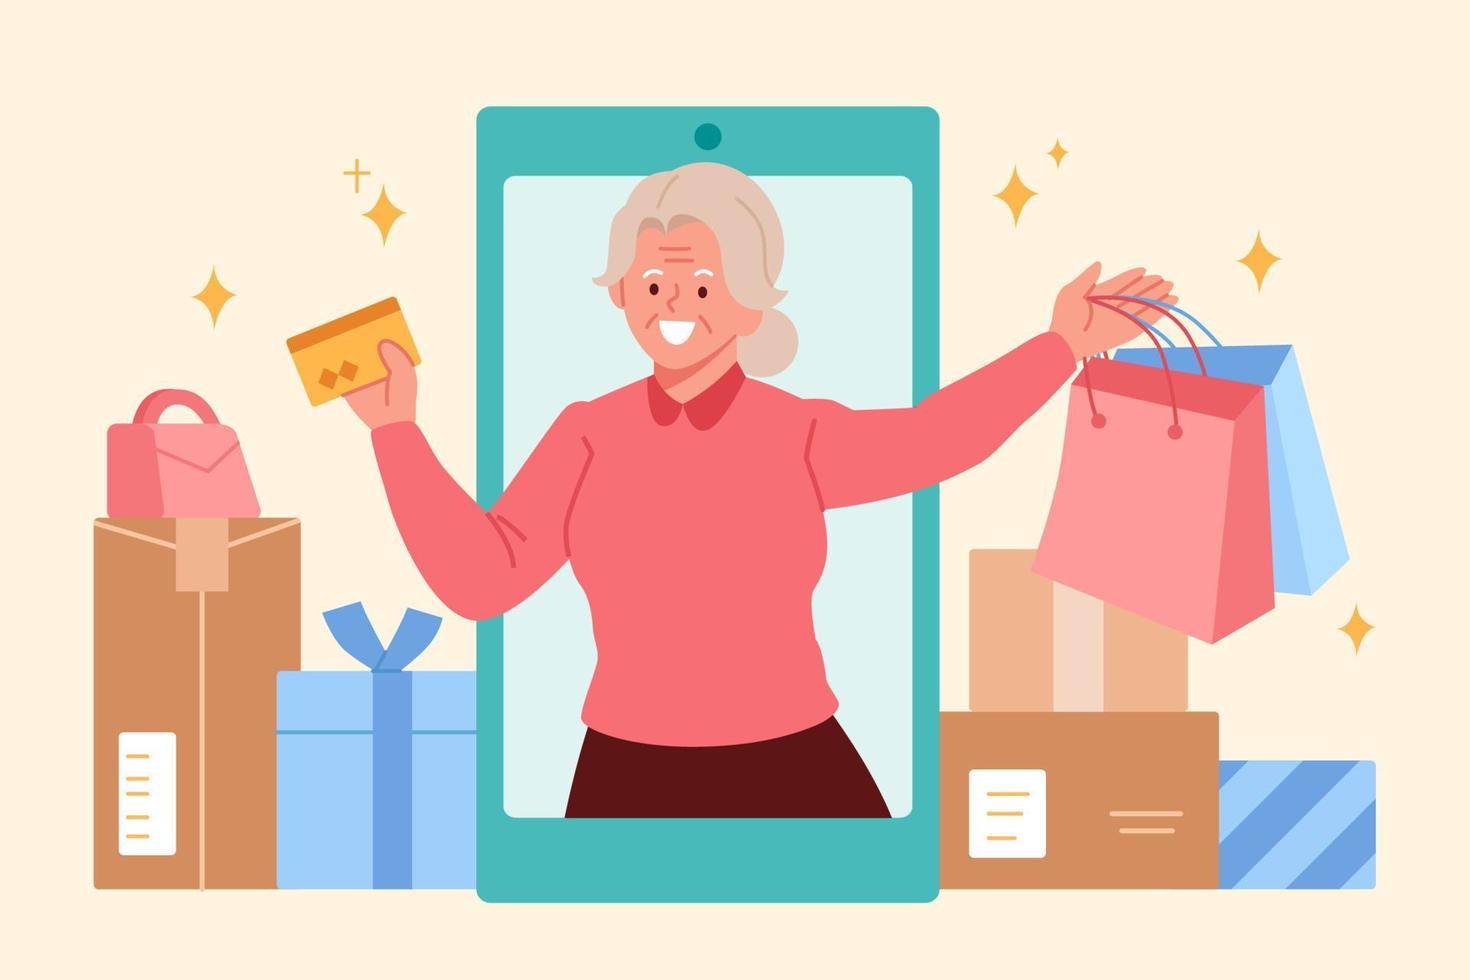 Elder loving online shopping. Flat illustration of an elderly woman making a bunch of purchases from Internet on her credit card vector